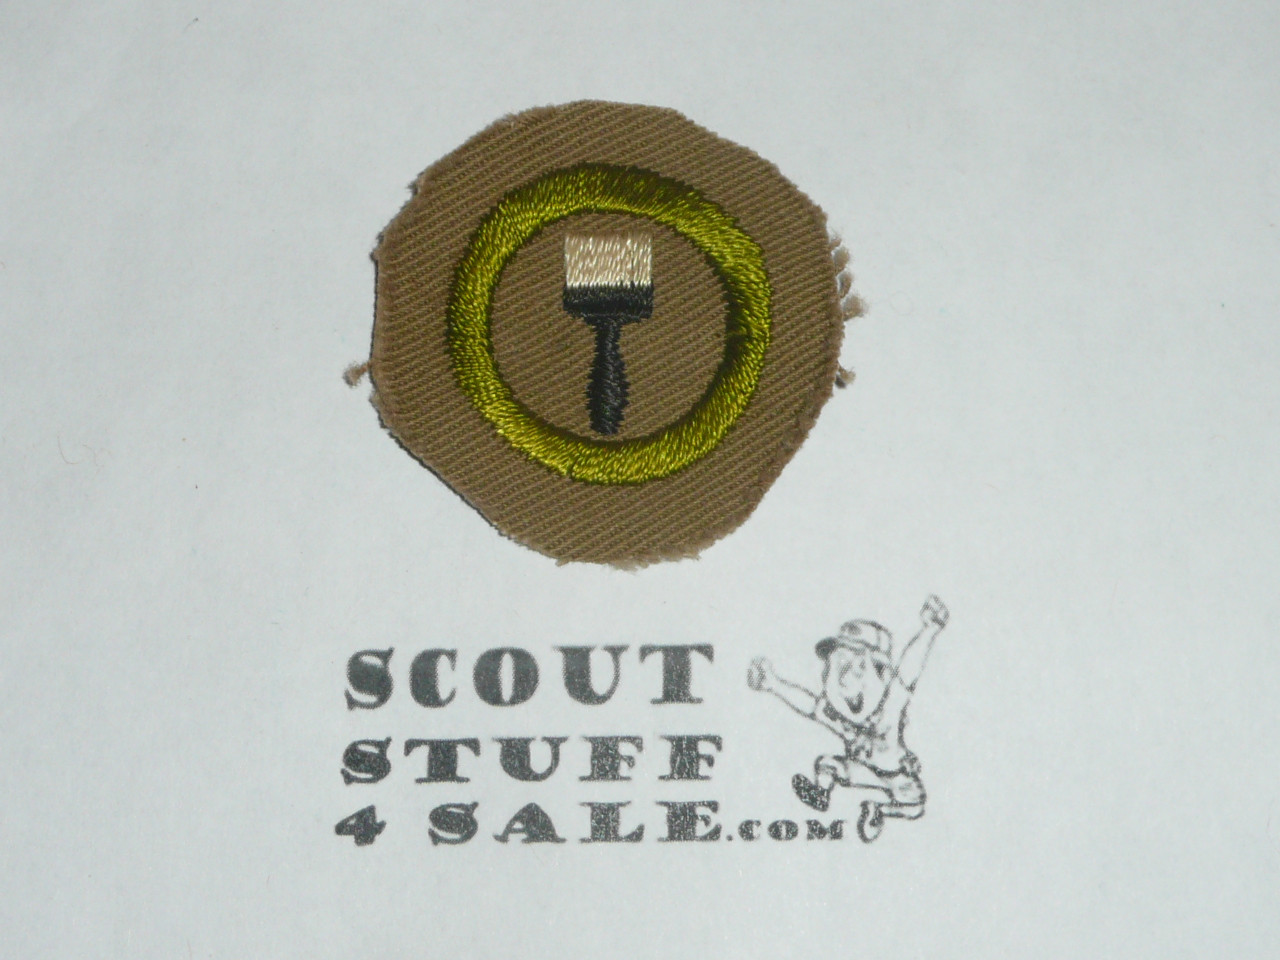 Painting - Type A - Square Tan Merit Badge (1911-1933), trimmed